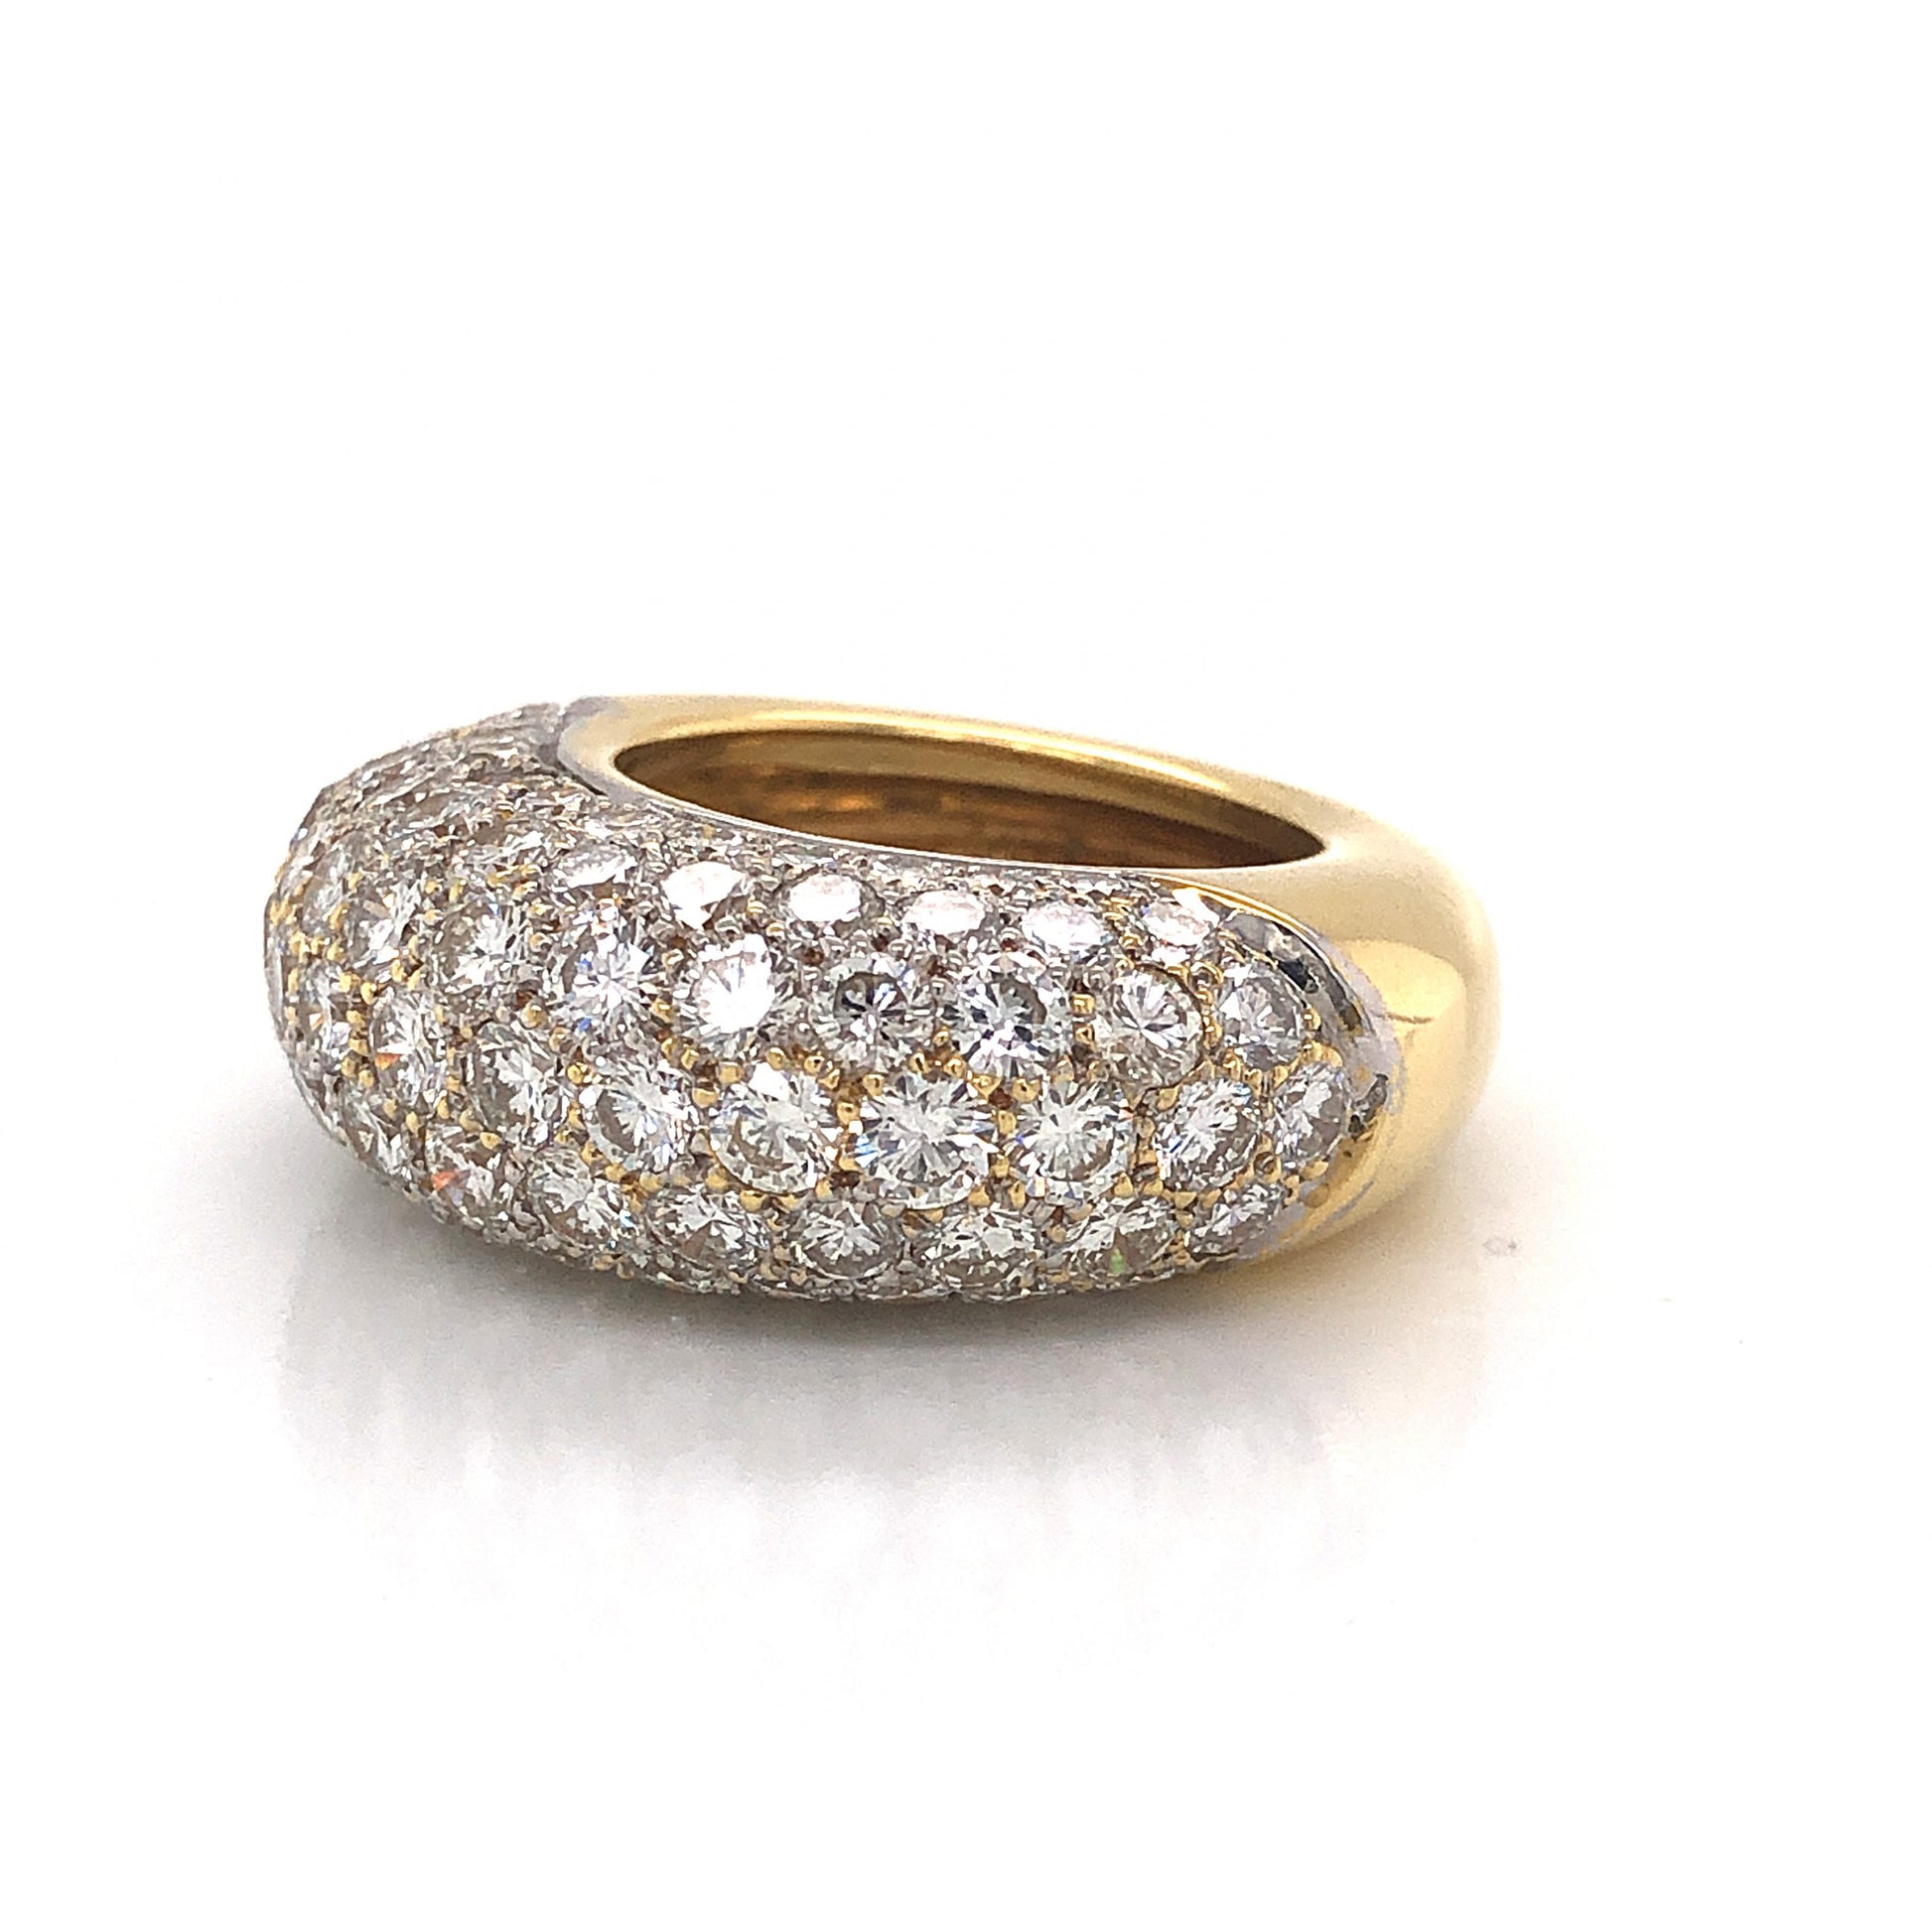 Rounded Pave Diamond Cocktail Ring 18k Yellow & White Gold